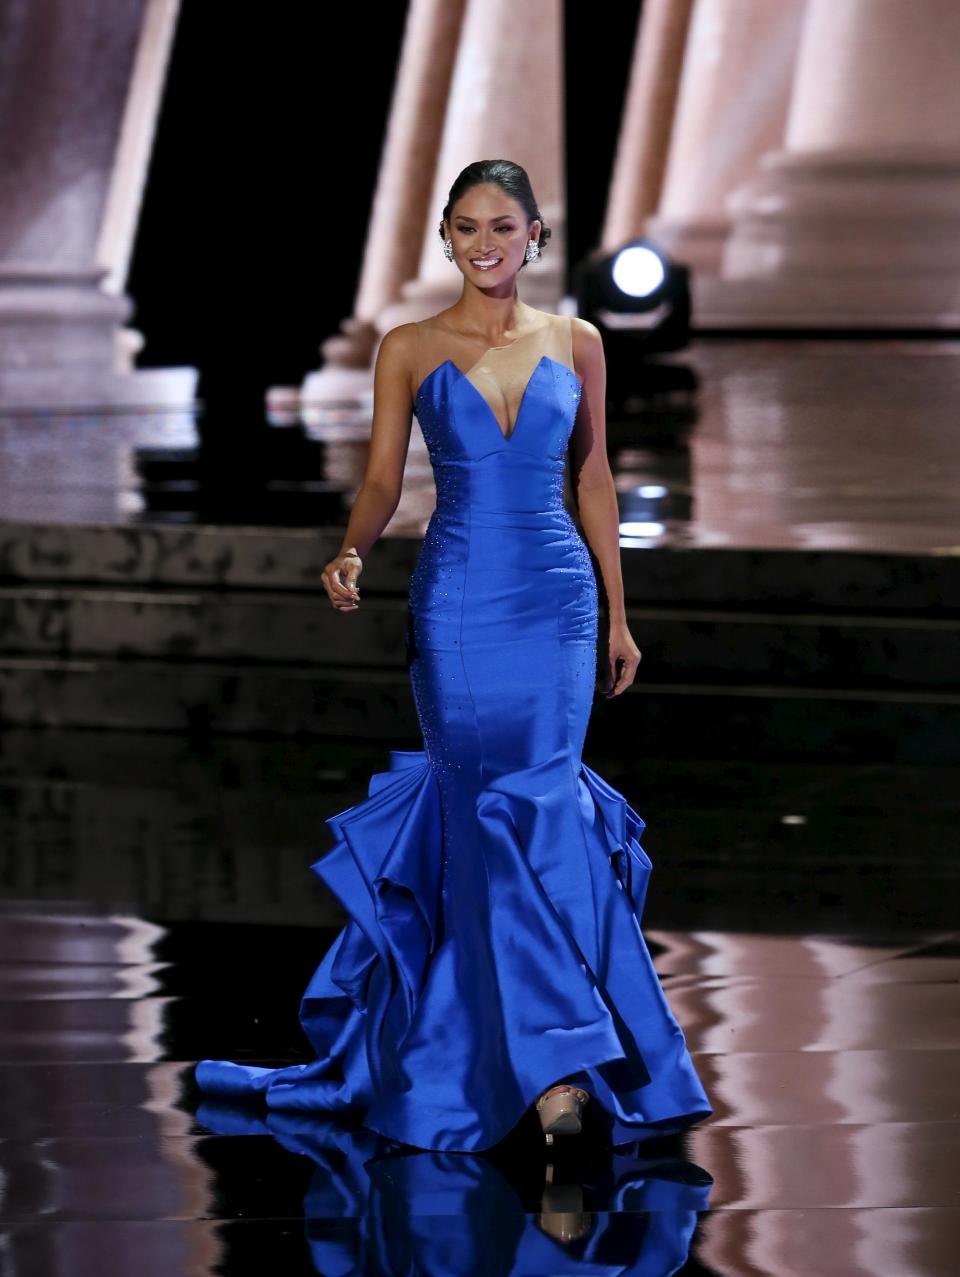 Miss Philippines Pia Alonzo Wurtzbach competes in the evening gown competition during the 2015 Miss Universe Pageant in Las Vegas